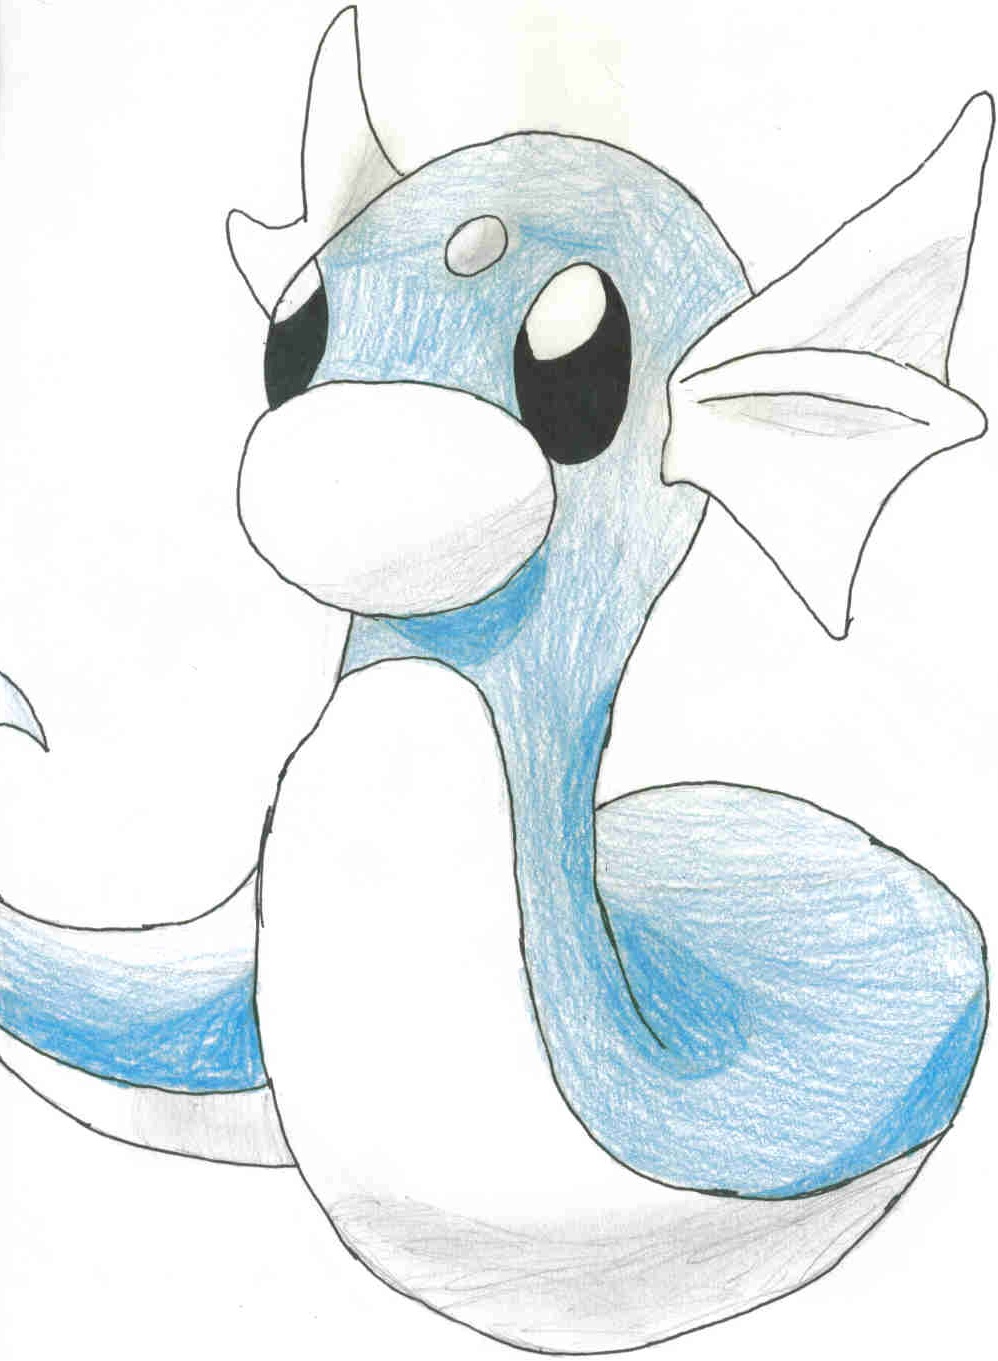 Dratini(first try) by crazicat06